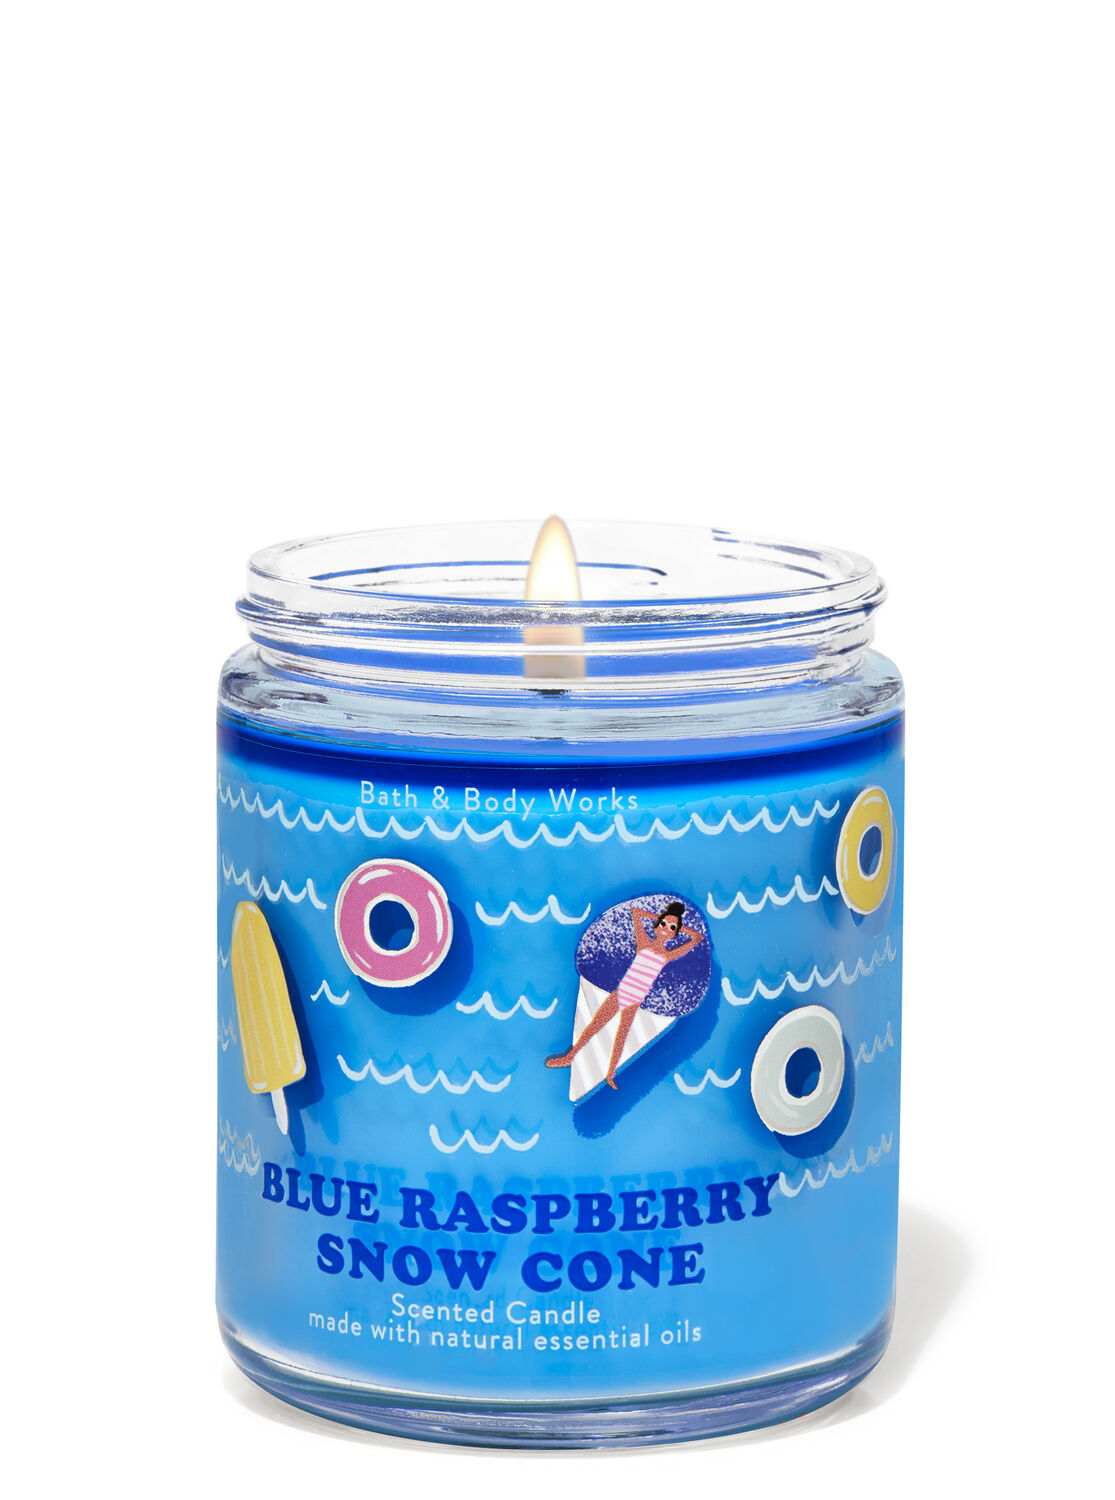 Bath & Body Works CHERRY SNOW CONE Large 3-Wick Candle 